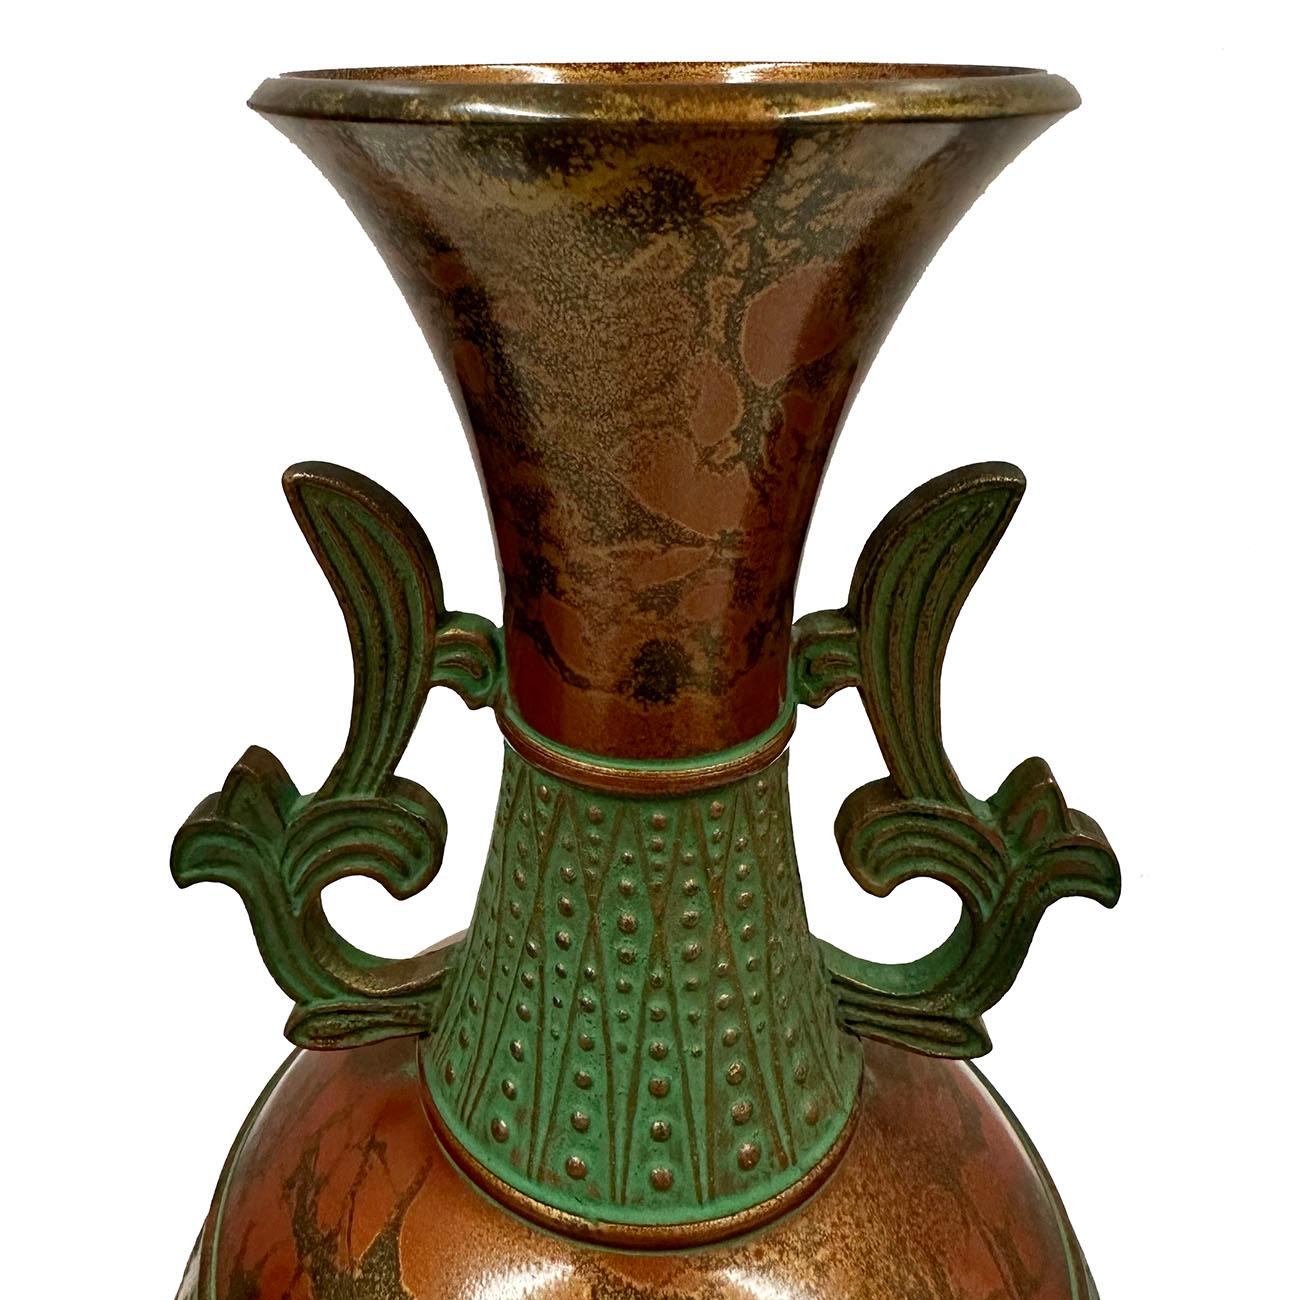 This beautiful Copper vase was made by famous metal ware company Takenaka Bronze Works. I was hand made of bronze with detailed carving works on it and has marks on the bottom. Look at the detailed pictures, it shows colorful and precise finishing